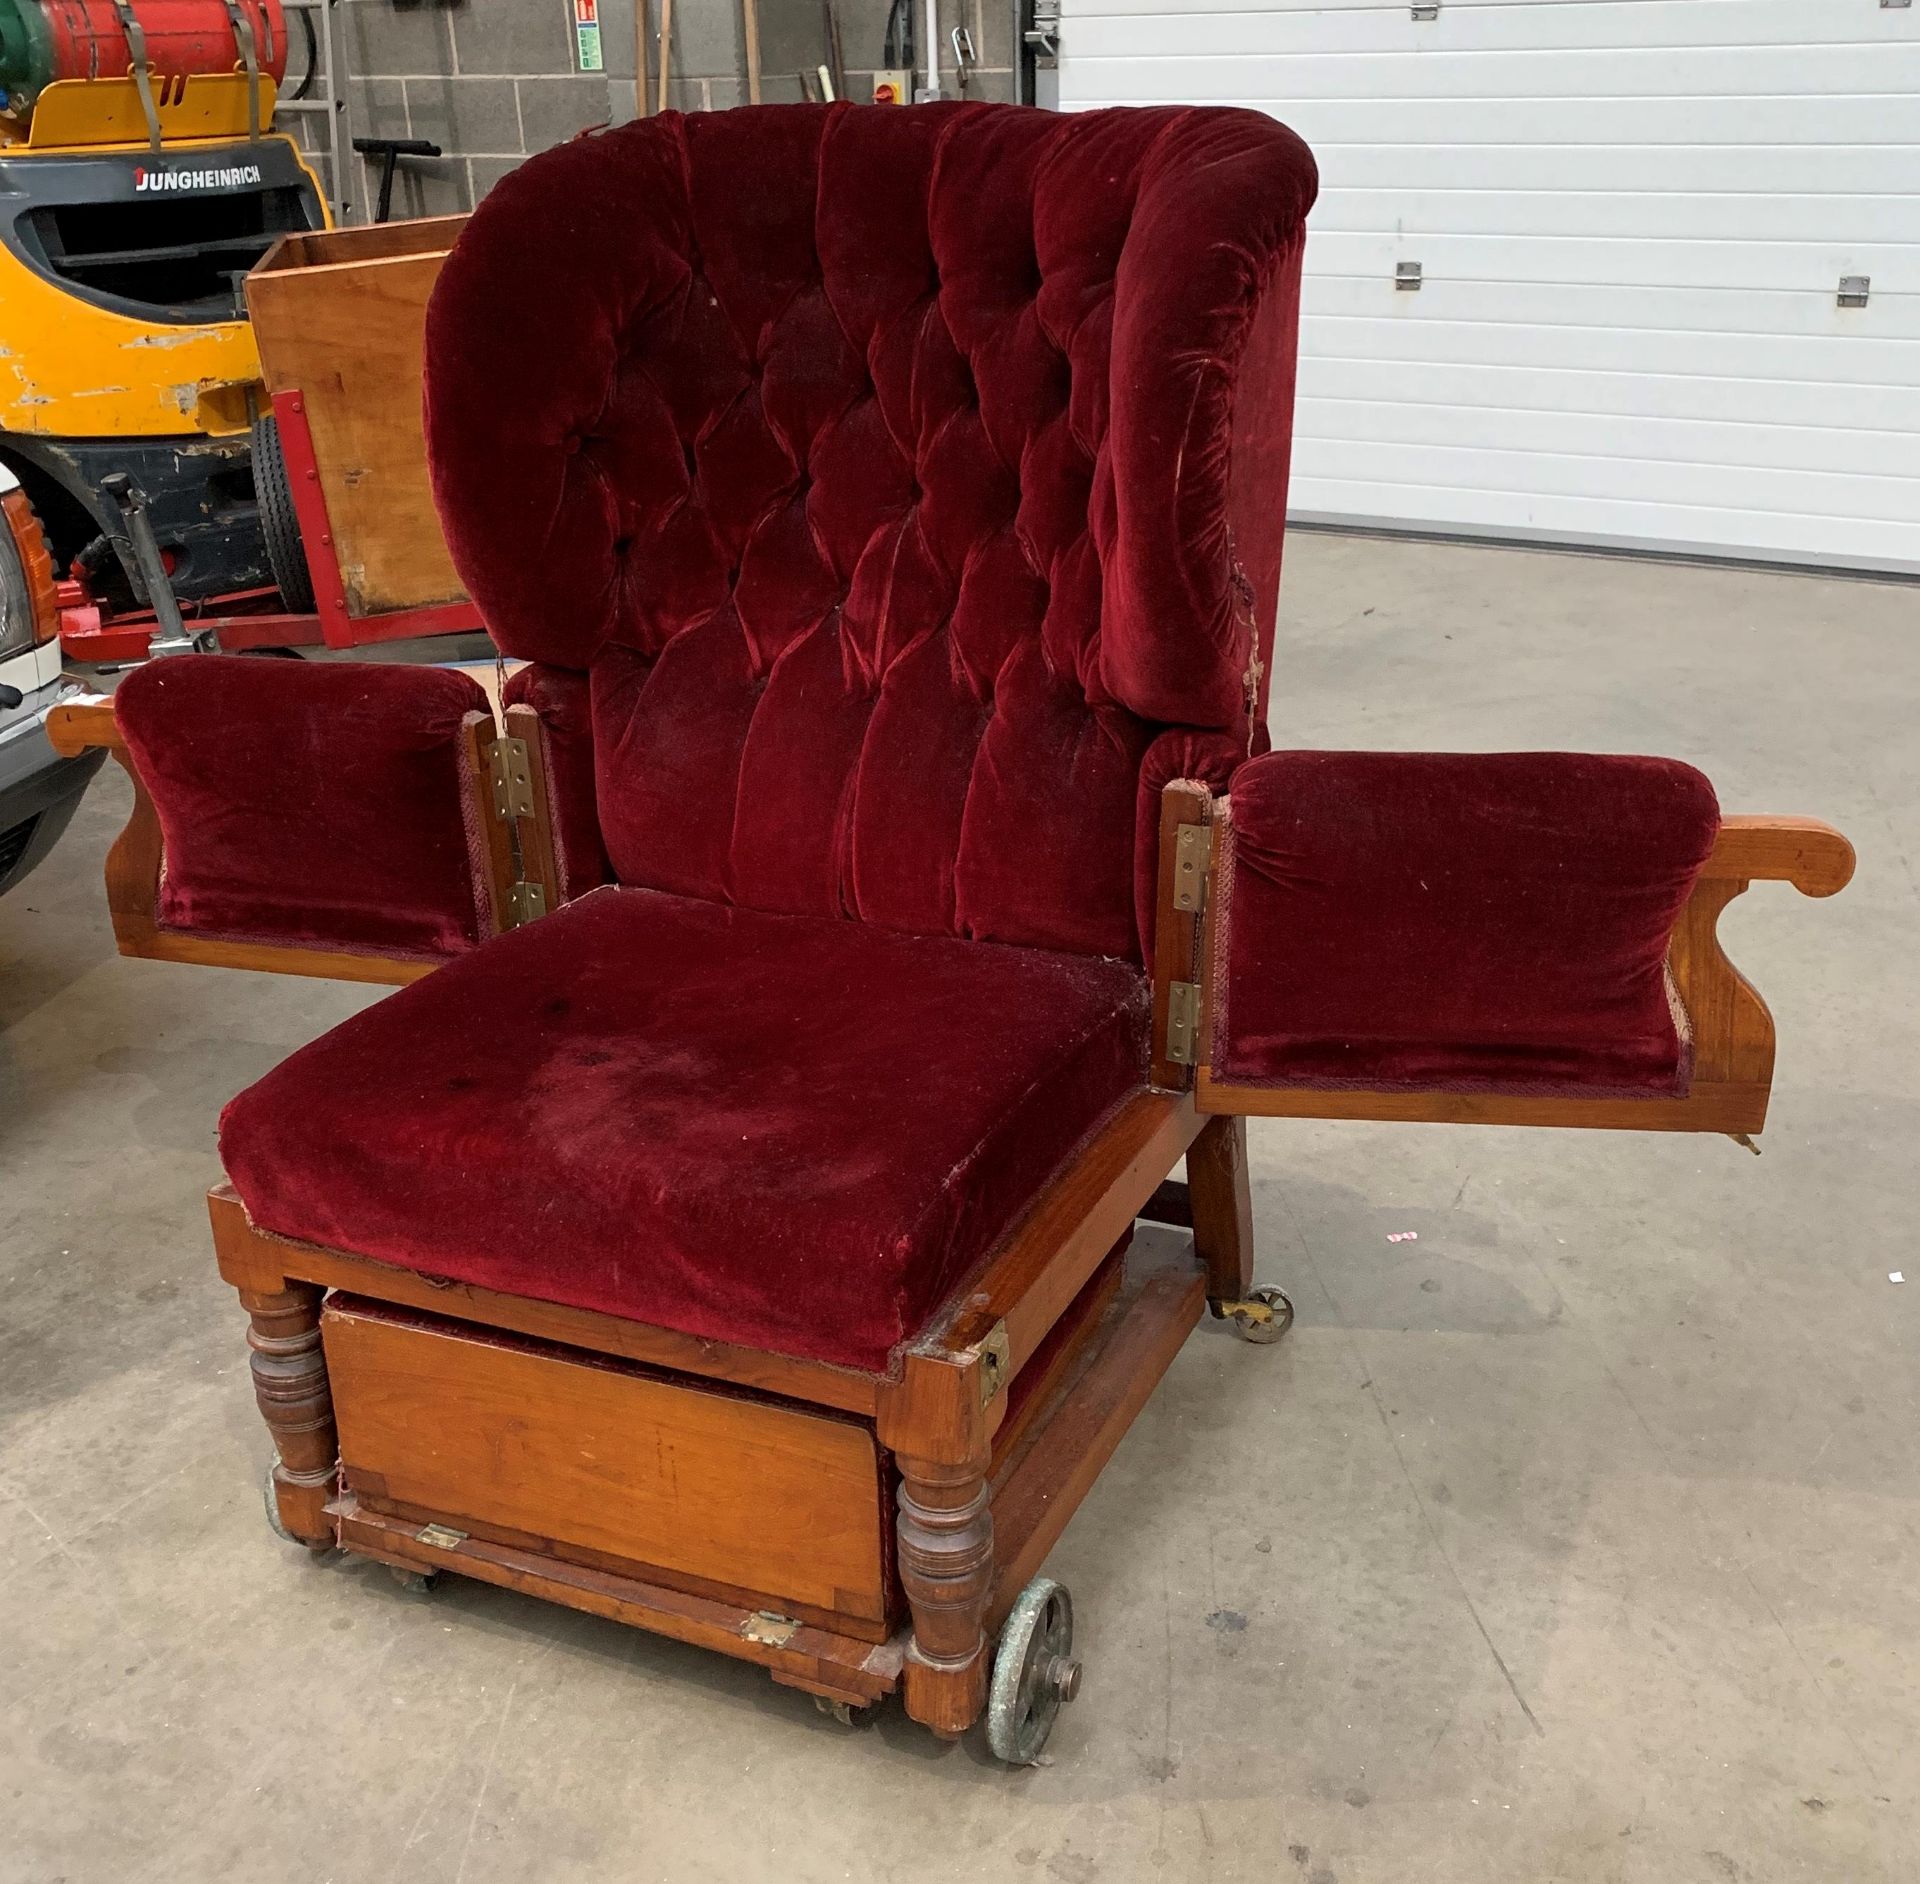 A Victorian invalid chair recovered in red velvet raised on brass wheels and labelled Leveson and